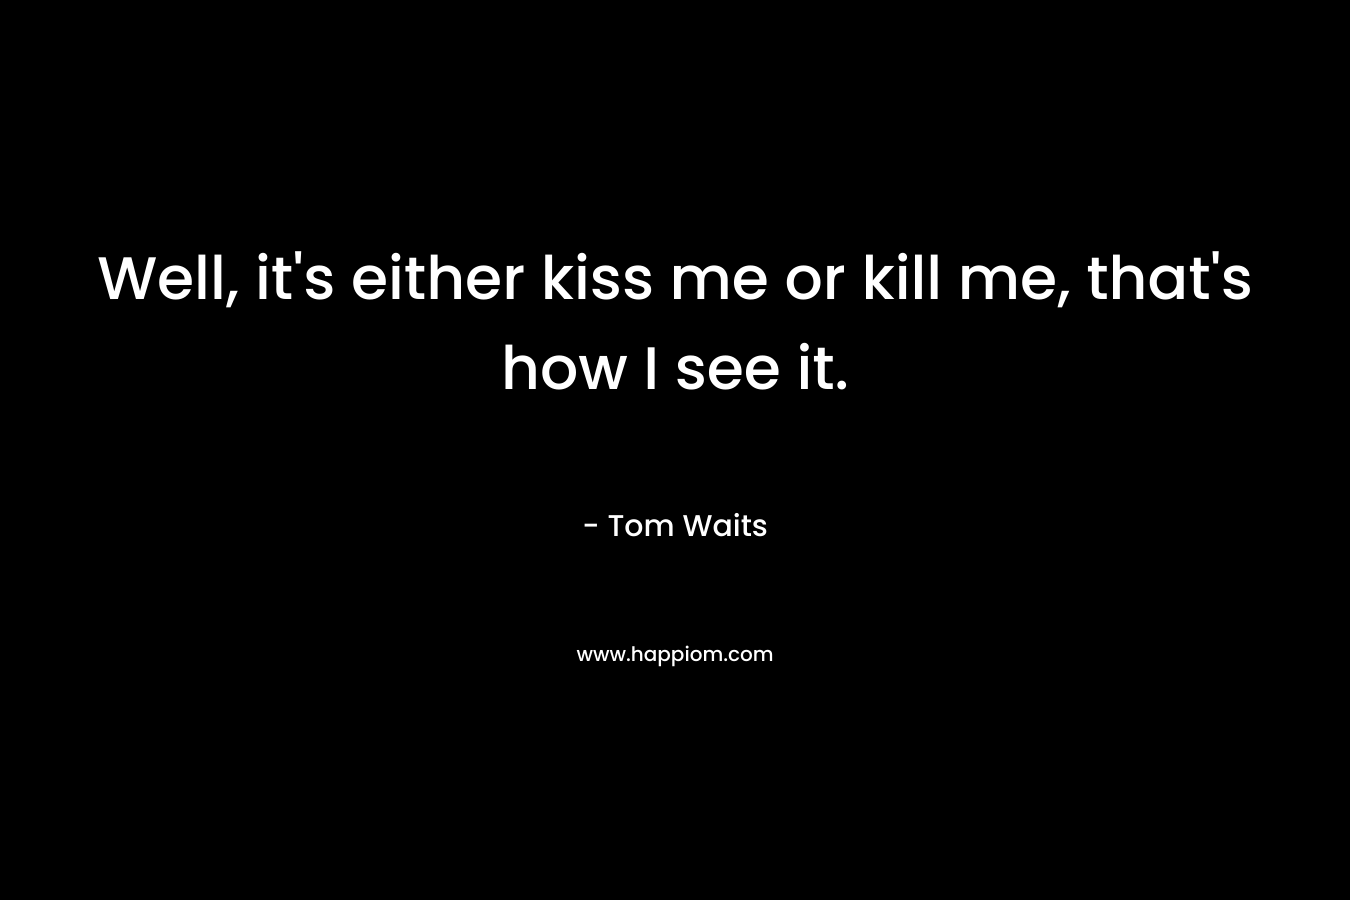 Well, it's either kiss me or kill me, that's how I see it.